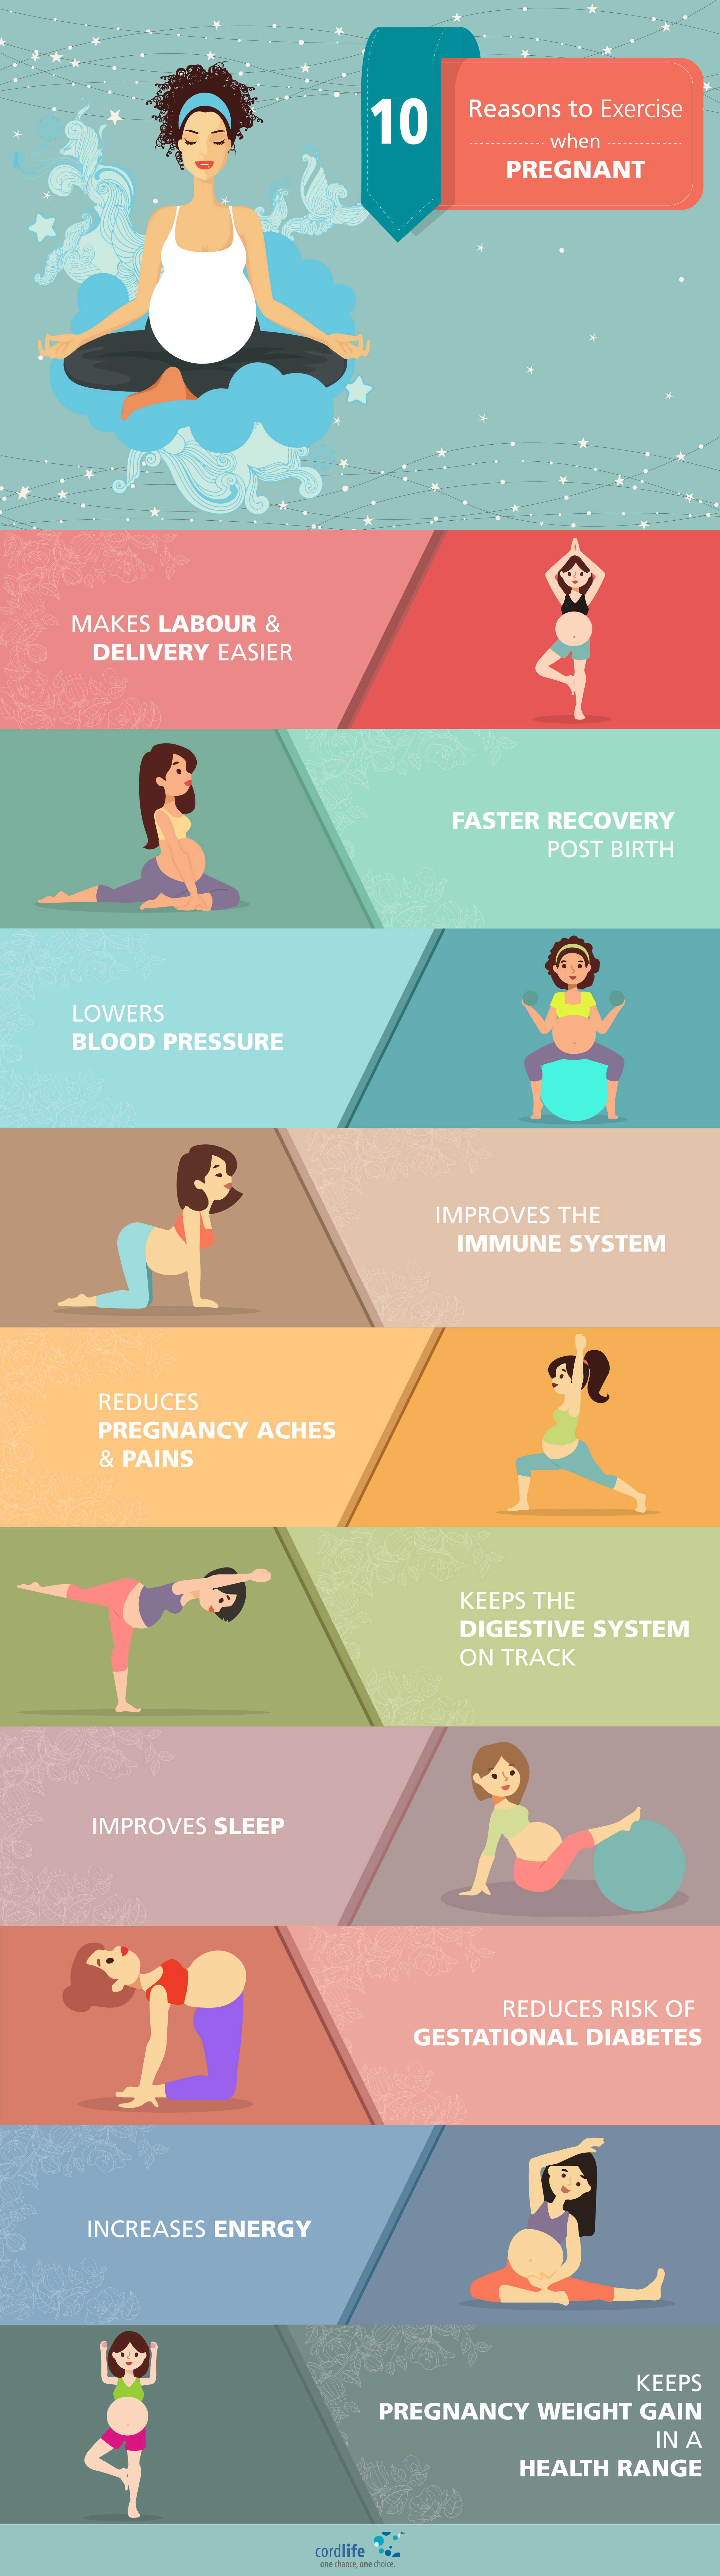 10 reasons to exercise when pregnant